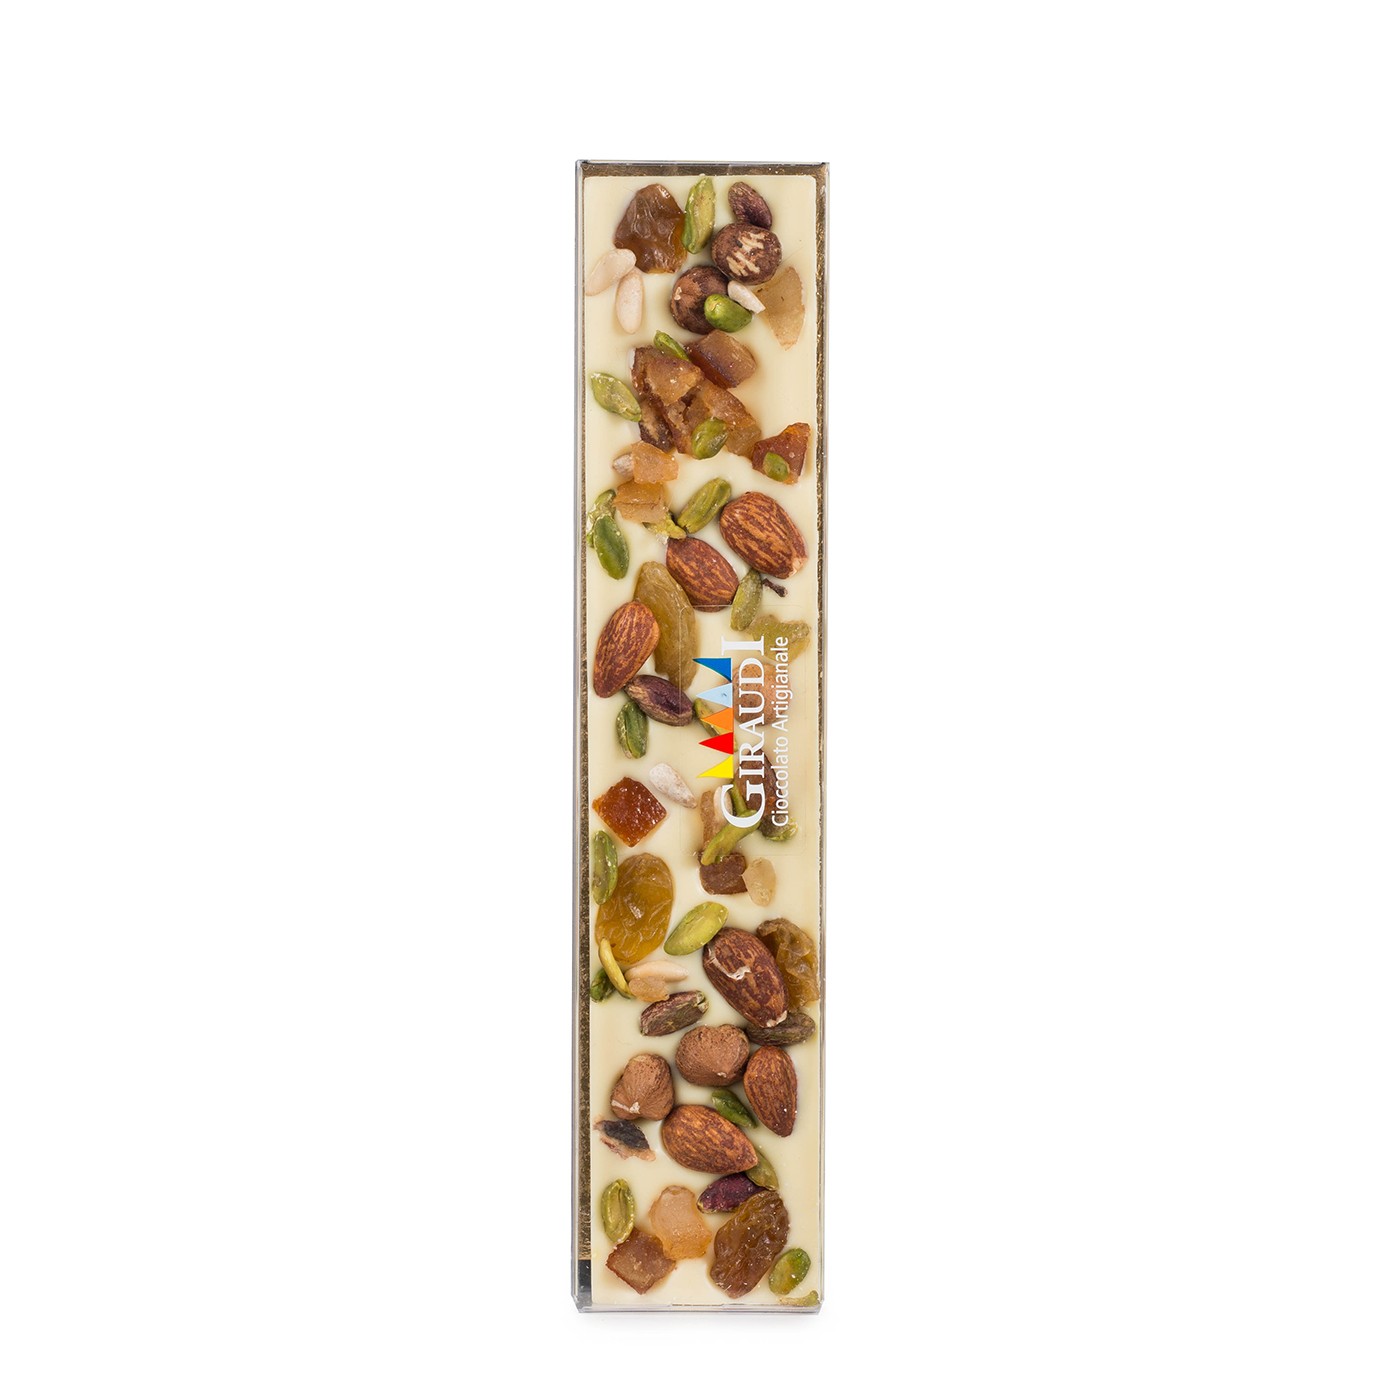 White Chocolate Bar with Nuts and Candied Fruit 4.23 oz